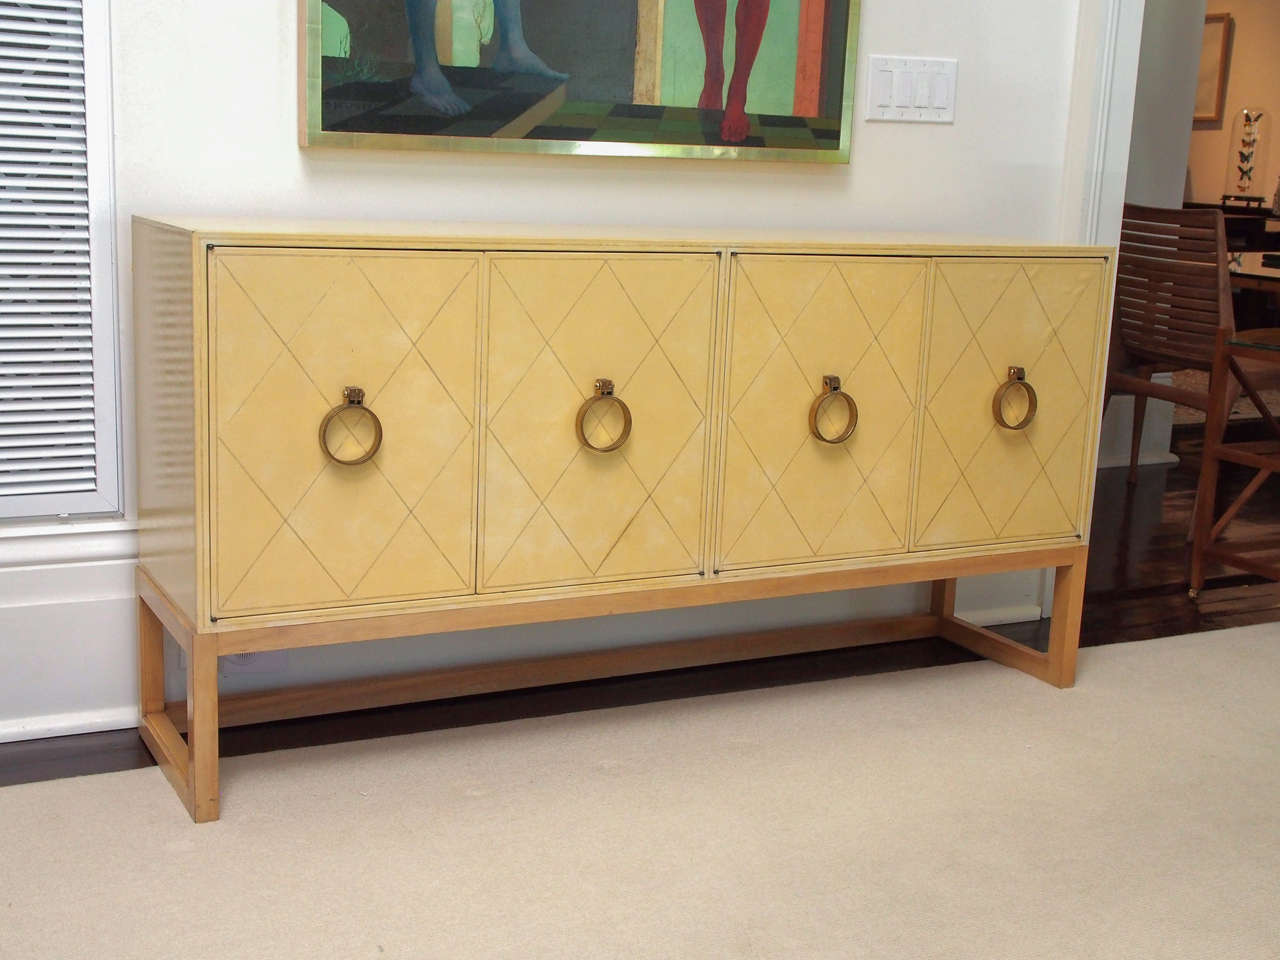 Credenza or sideboard by Tommi Parzinger (1903-1972) for Charak Modern, circa 1940s. Retaining its Charak Modern paper label. Each cabinet opening with two doors, one drawer and one adjustable shelf (shown resting at bottom of cabinets). The whole